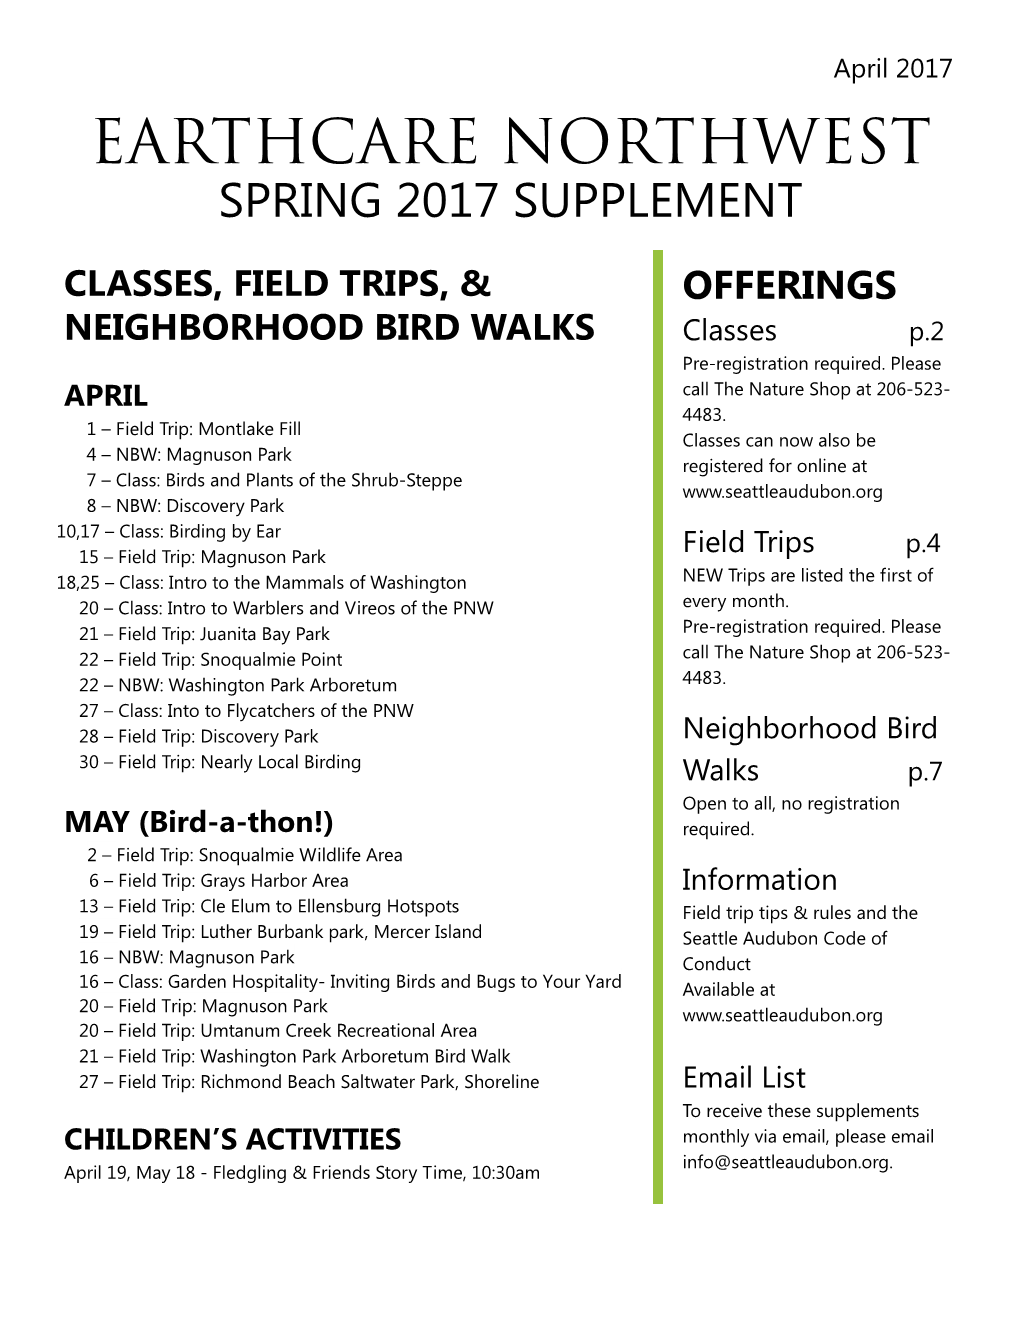 Earthcare Northwest Spring 2017 Supplement